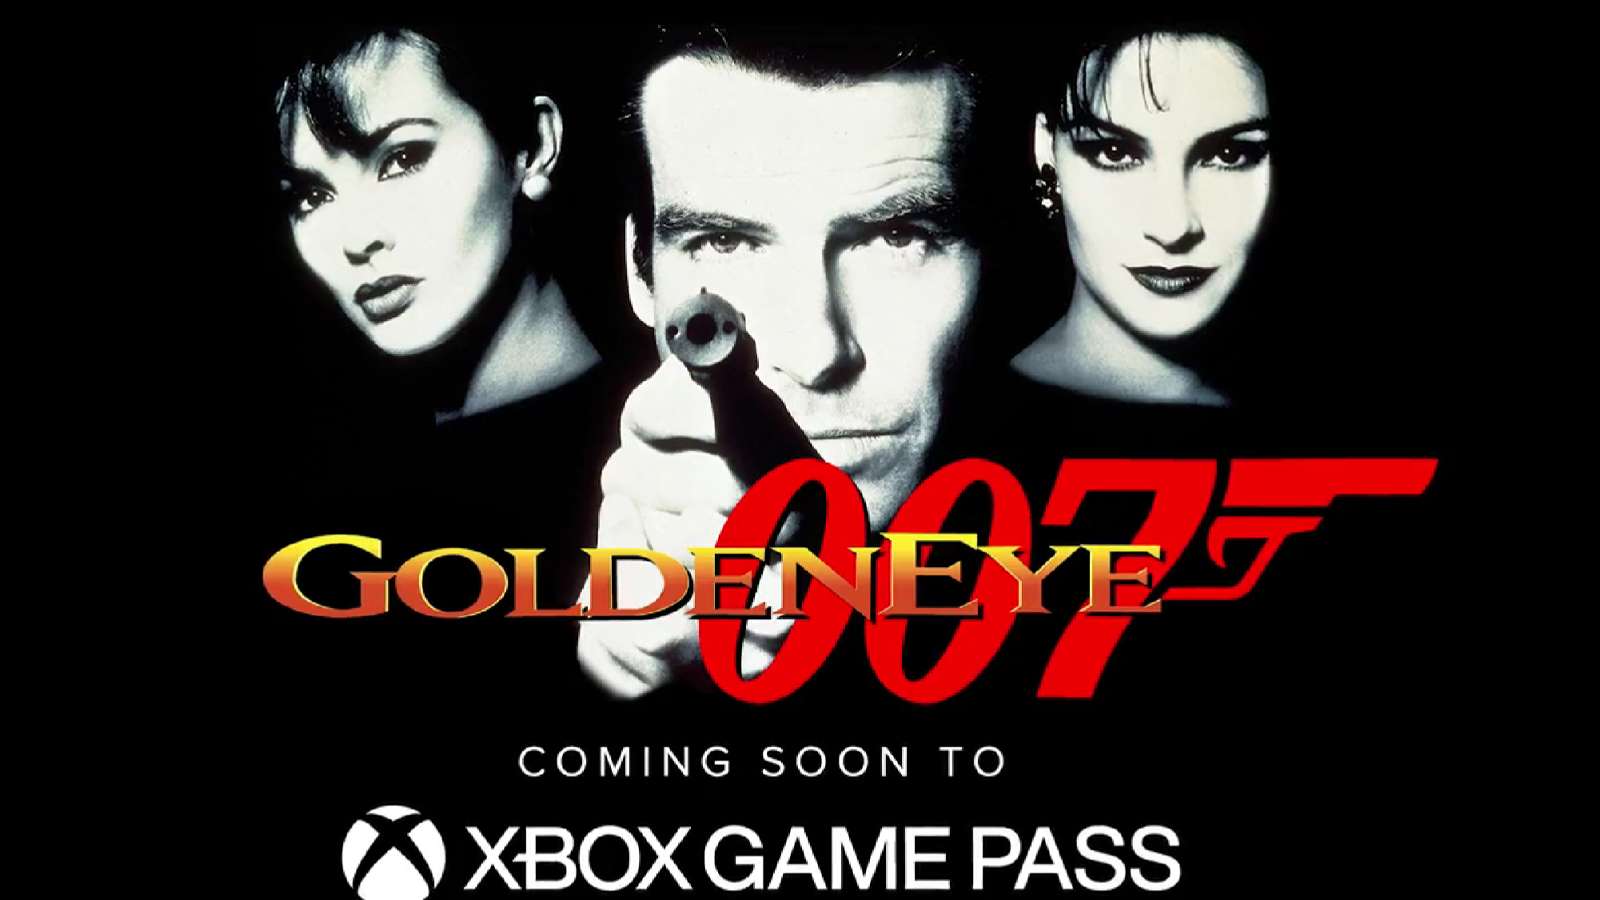 an image of goldeneye 007 on xbox game pass